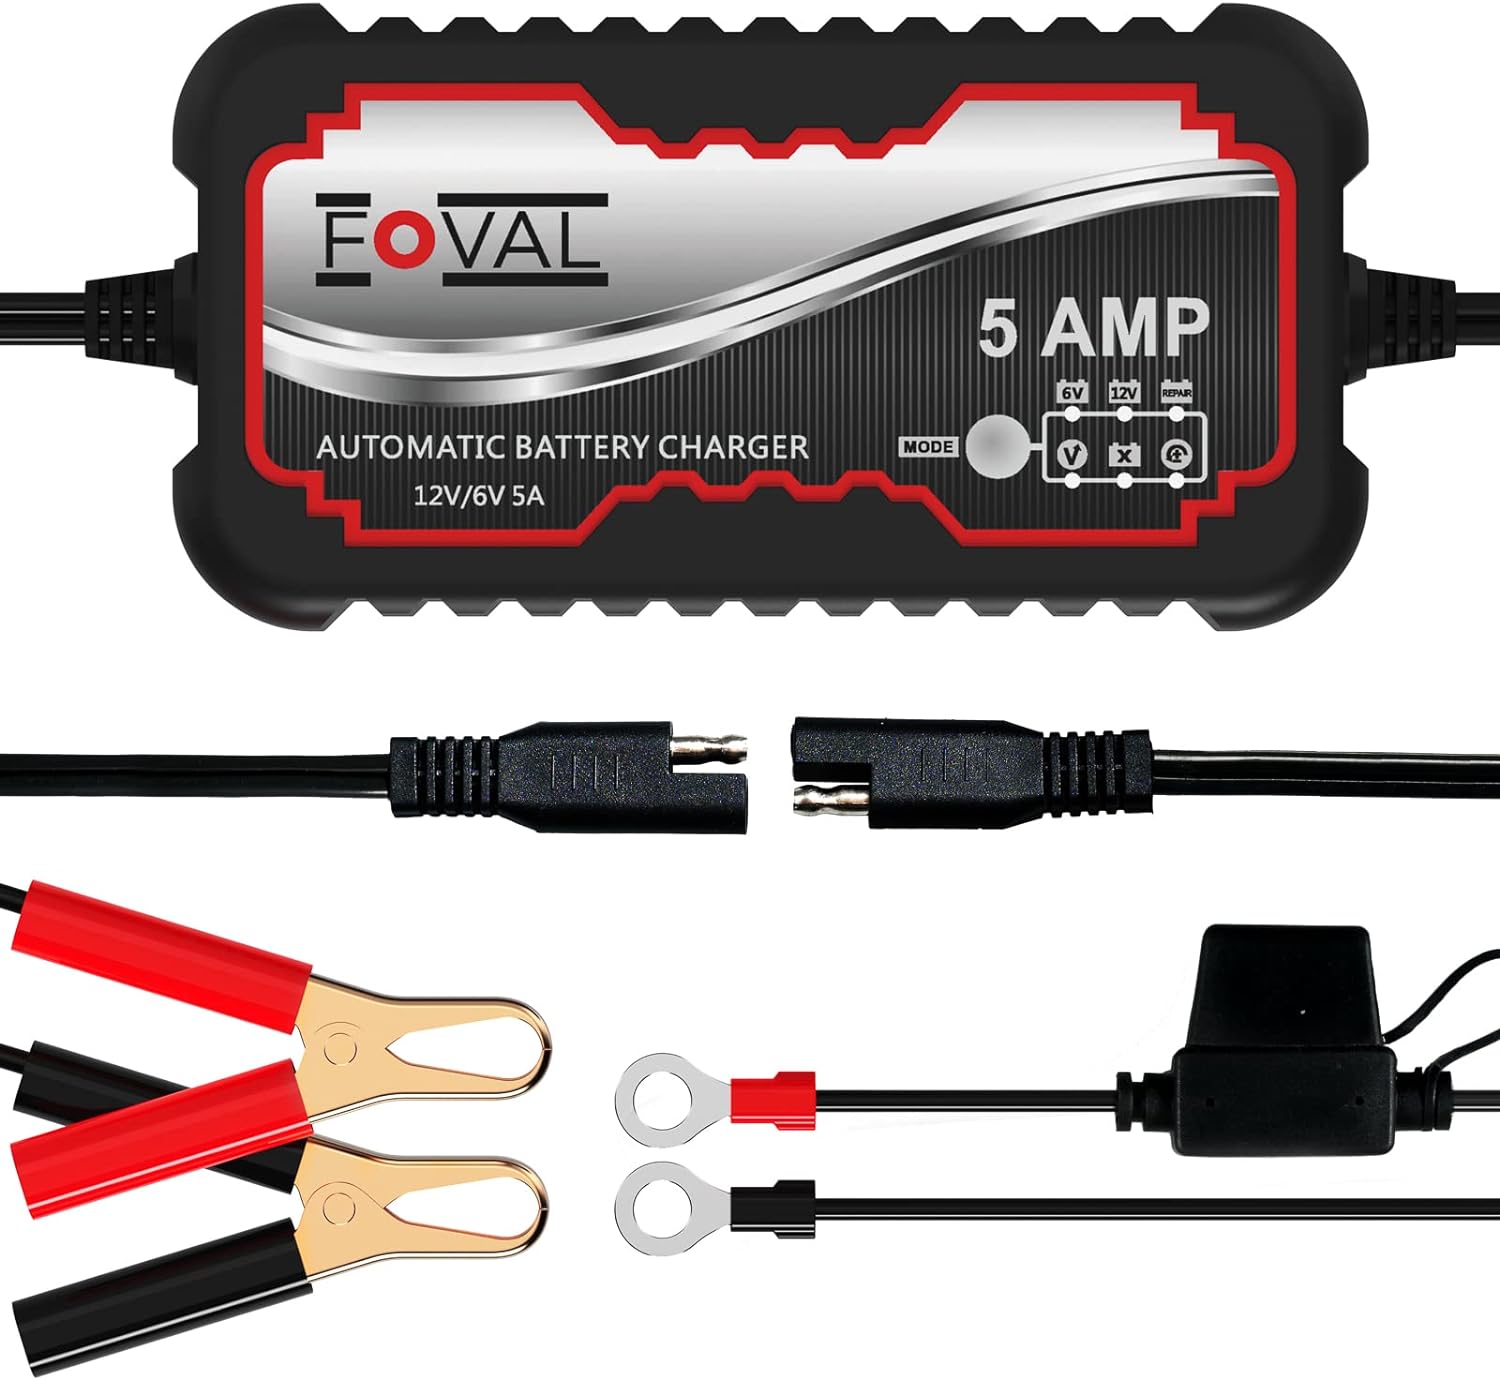 FOVAL 5A Smart Car Battery Charger Review